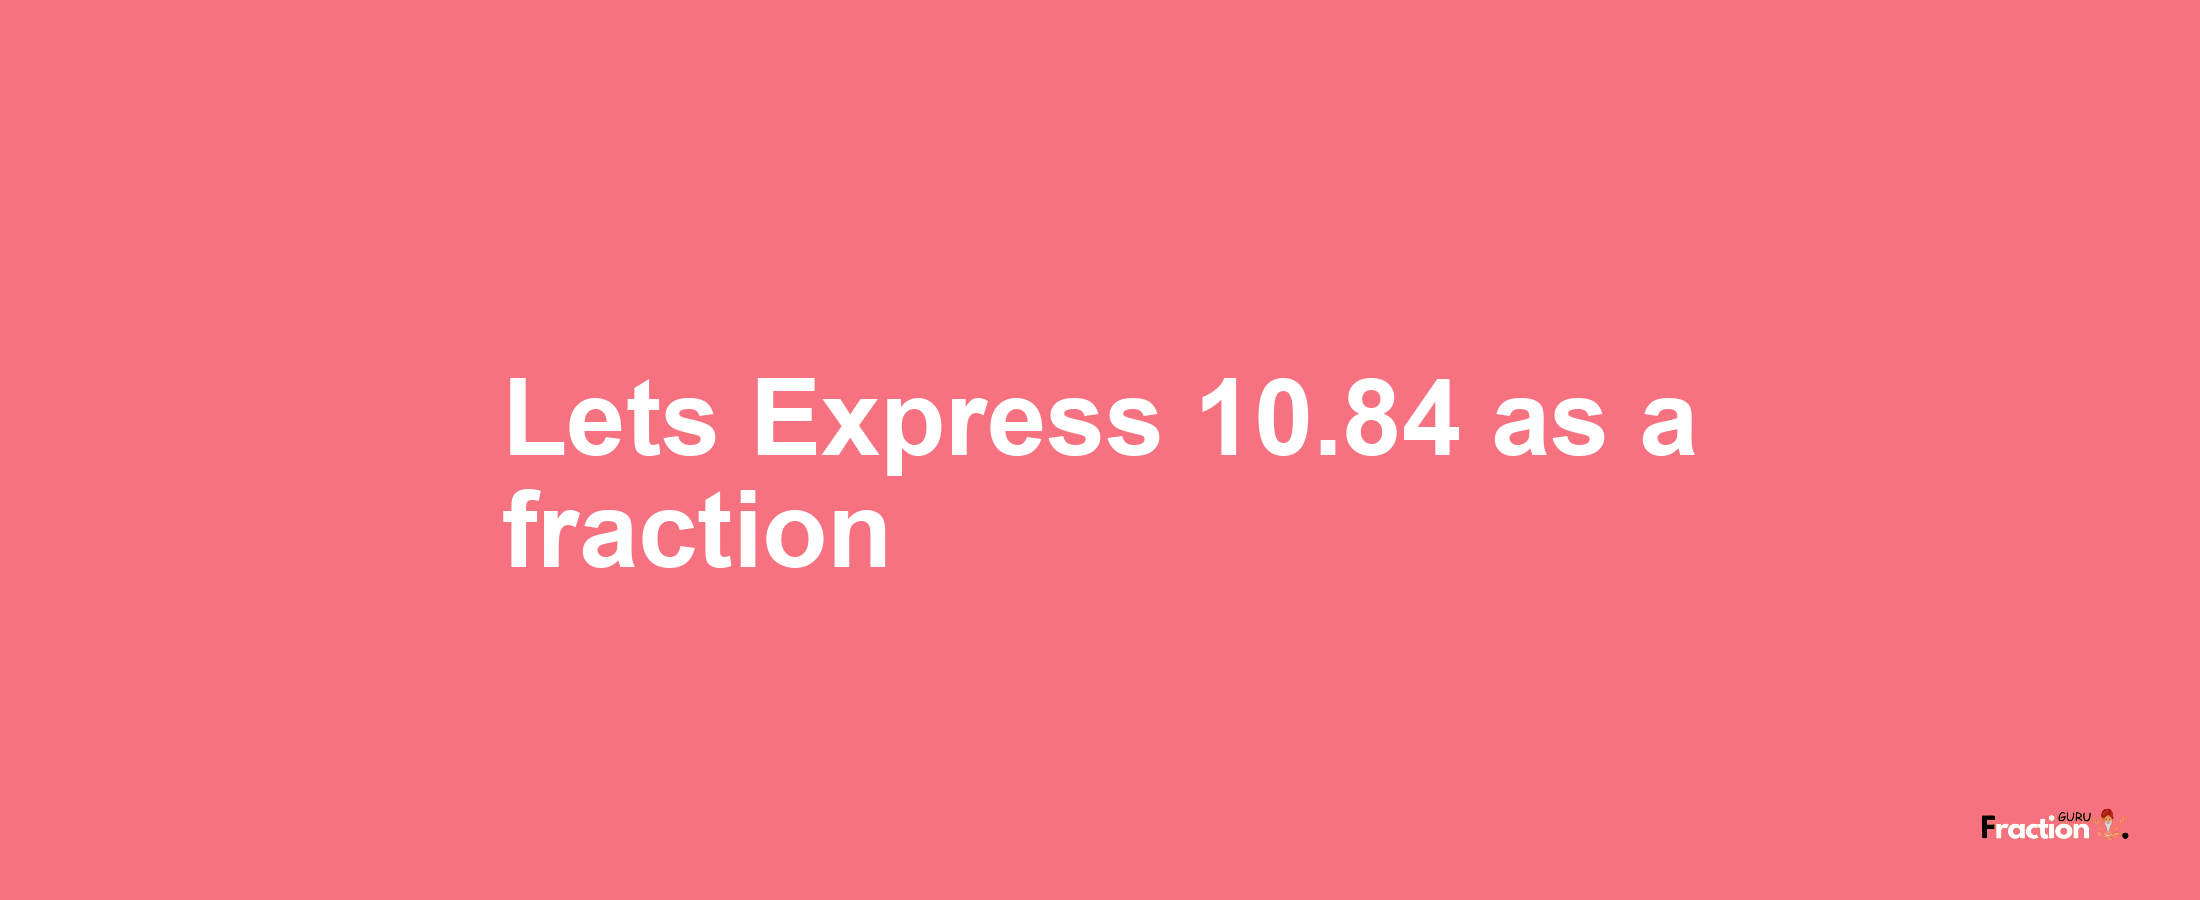 Lets Express 10.84 as afraction